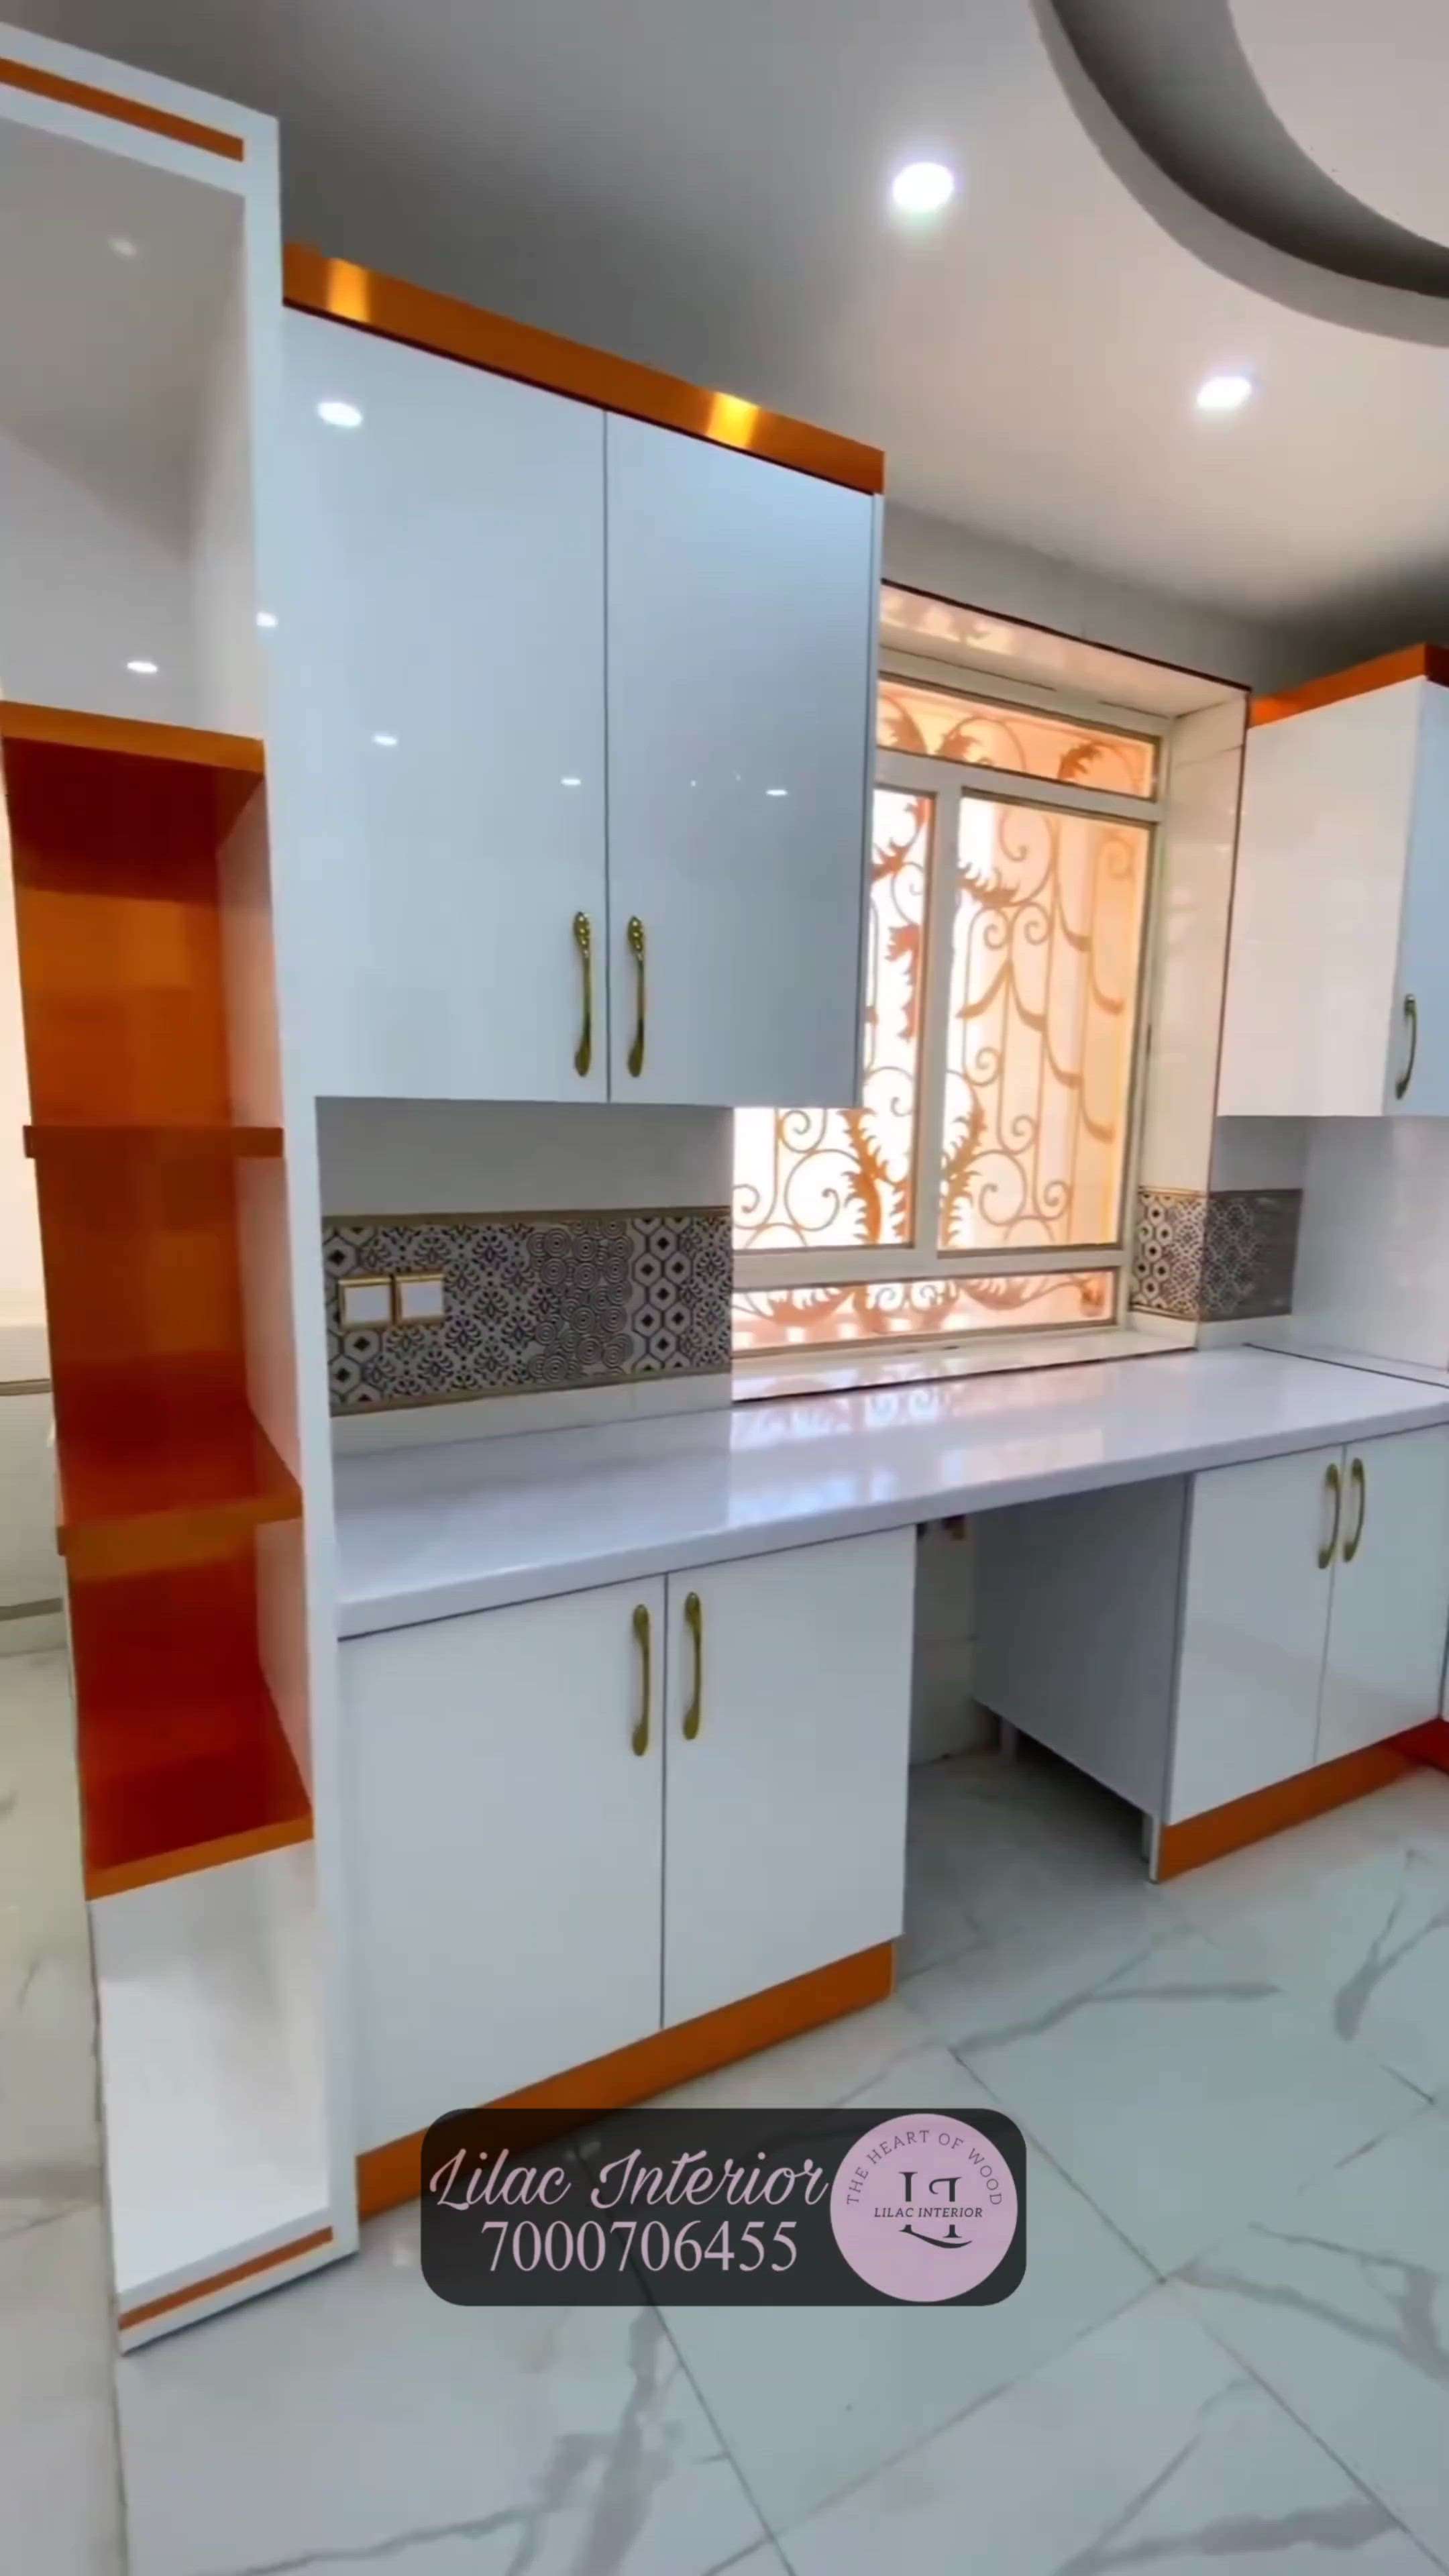 White Shade Moduler Kitchen By Lilac Interior 😍🤩

📞Contact for work - 7000706455
📩 Comment or DM 'smart' to order

#OpenKitchnen #openspace #ModularKitchen #noidainterior #noidakitchen #Delhihome #delhiinteriors #delhiinteriordesigner #DecorIdeas #kitchendecor #openkitchendesign #handmadekitchen #delhiinteriors #noidaintreor #noidainterior #LargeKitchen #handmade #premiumpots #premiumproduct #premiumhomes #Modularfurniture #modularkitchenindelhi #Modularfurniture #LargeKitchen #ClosedKitchen #KitchenCabinet #WoodenKitchen #kitchen #kitchendesign #interiordesign #homedecor #design #interior #cooking #kitchendecor